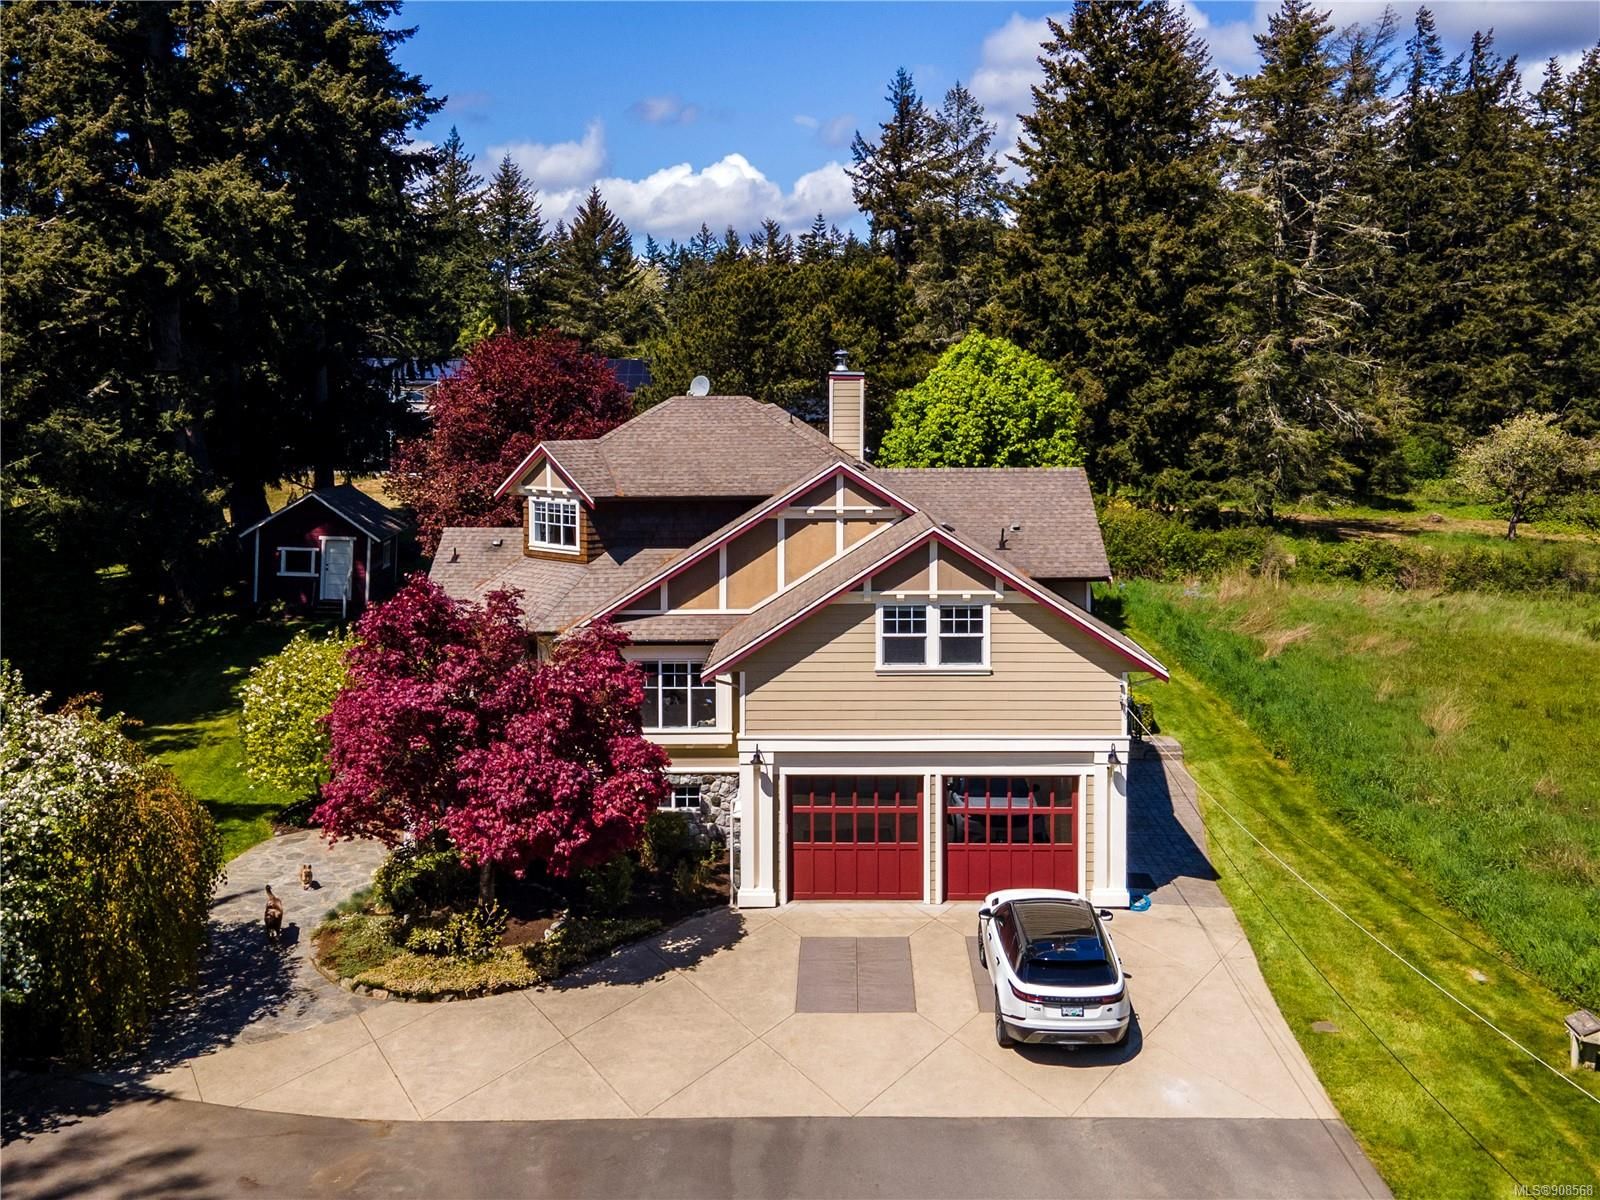 I have sold a property at 4590 Rocky Point Rd in Metchosin
